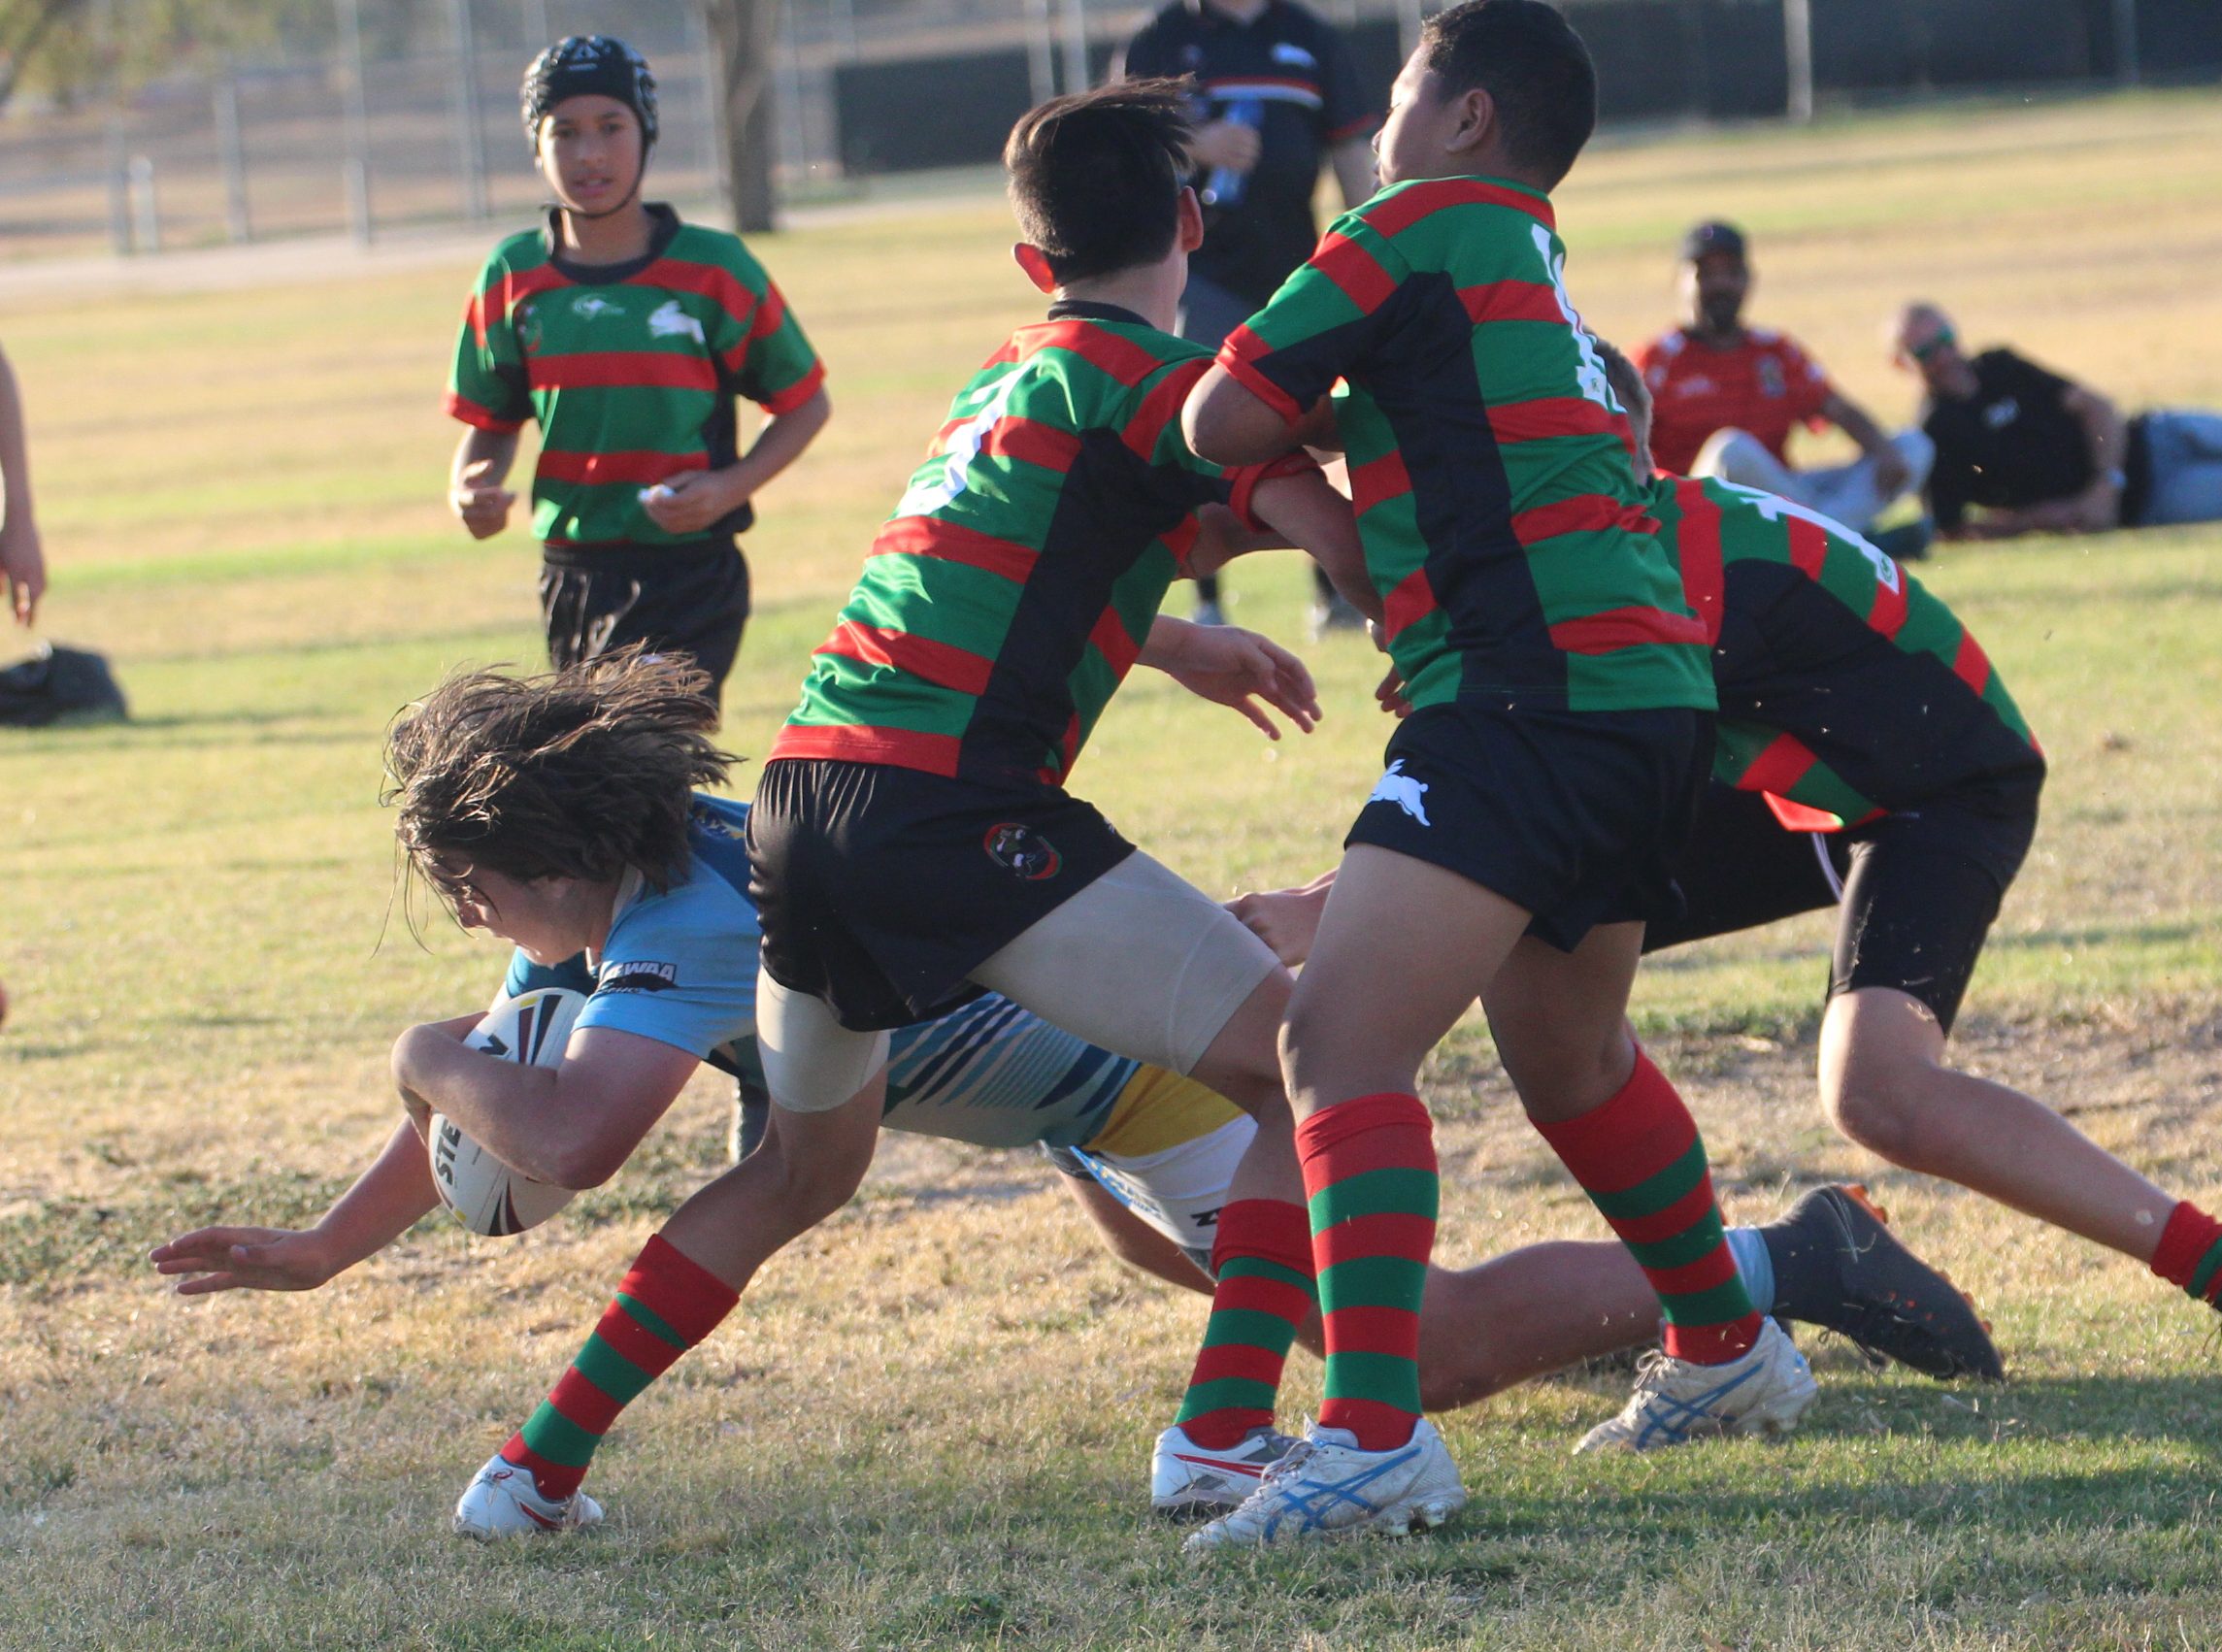 Daniel McMillan dives over for Narrabri’s first try after beating five defenders during a solid run.